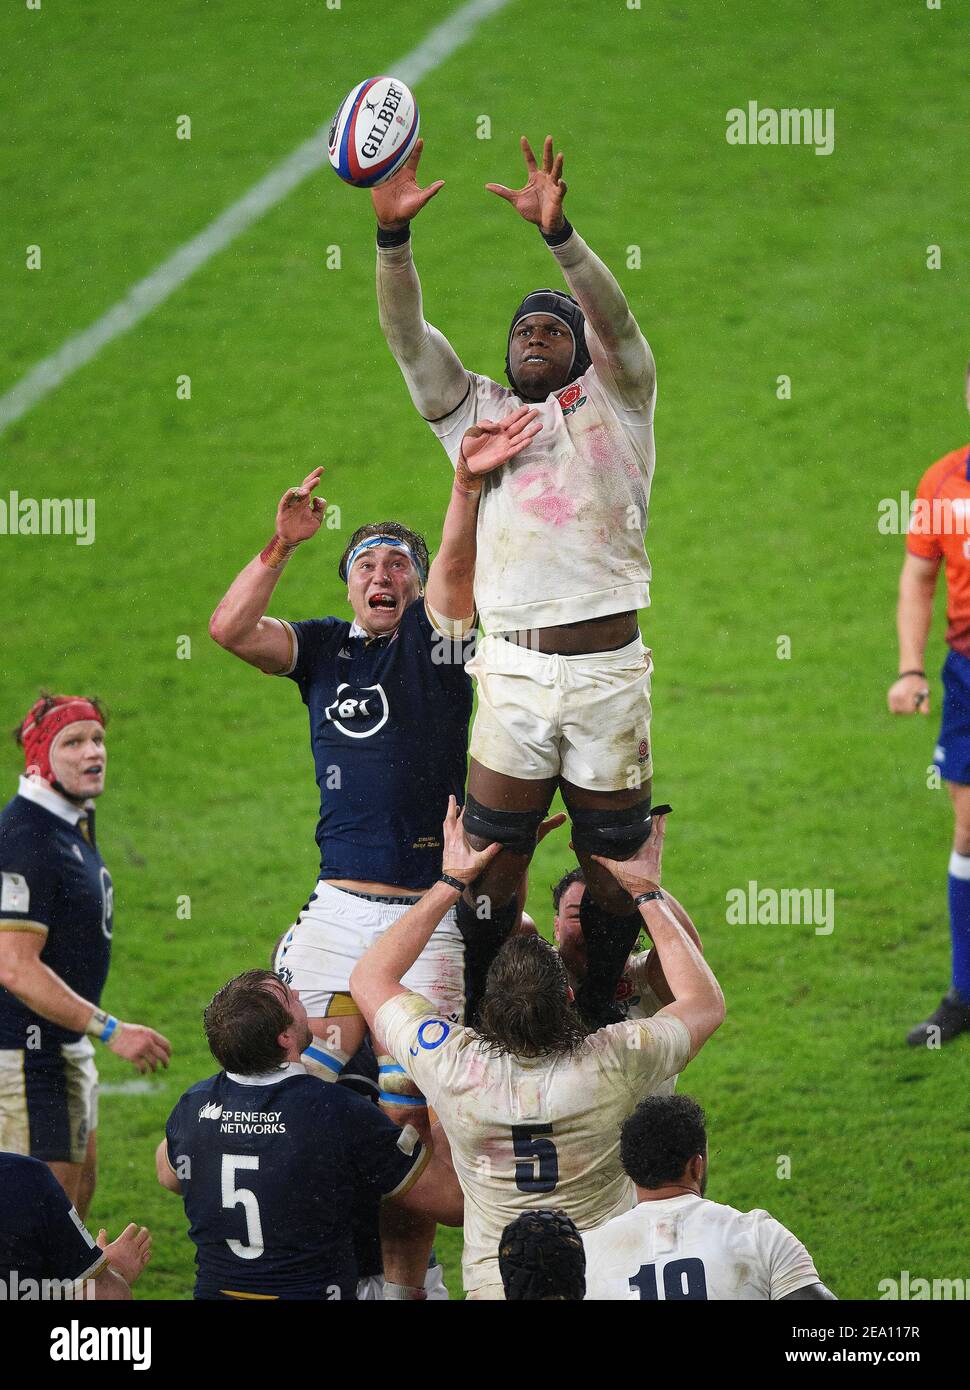 Twickenham, UK. 06th Feb, 2021. Twickenham Stadium, London 6th Feb 2021 England's Maro Itoje battles in the lineout with George Turner during their Six Nations match against Scotland. Picture Credit : Credit: Mark Pain/Alamy Live News Stock Photo